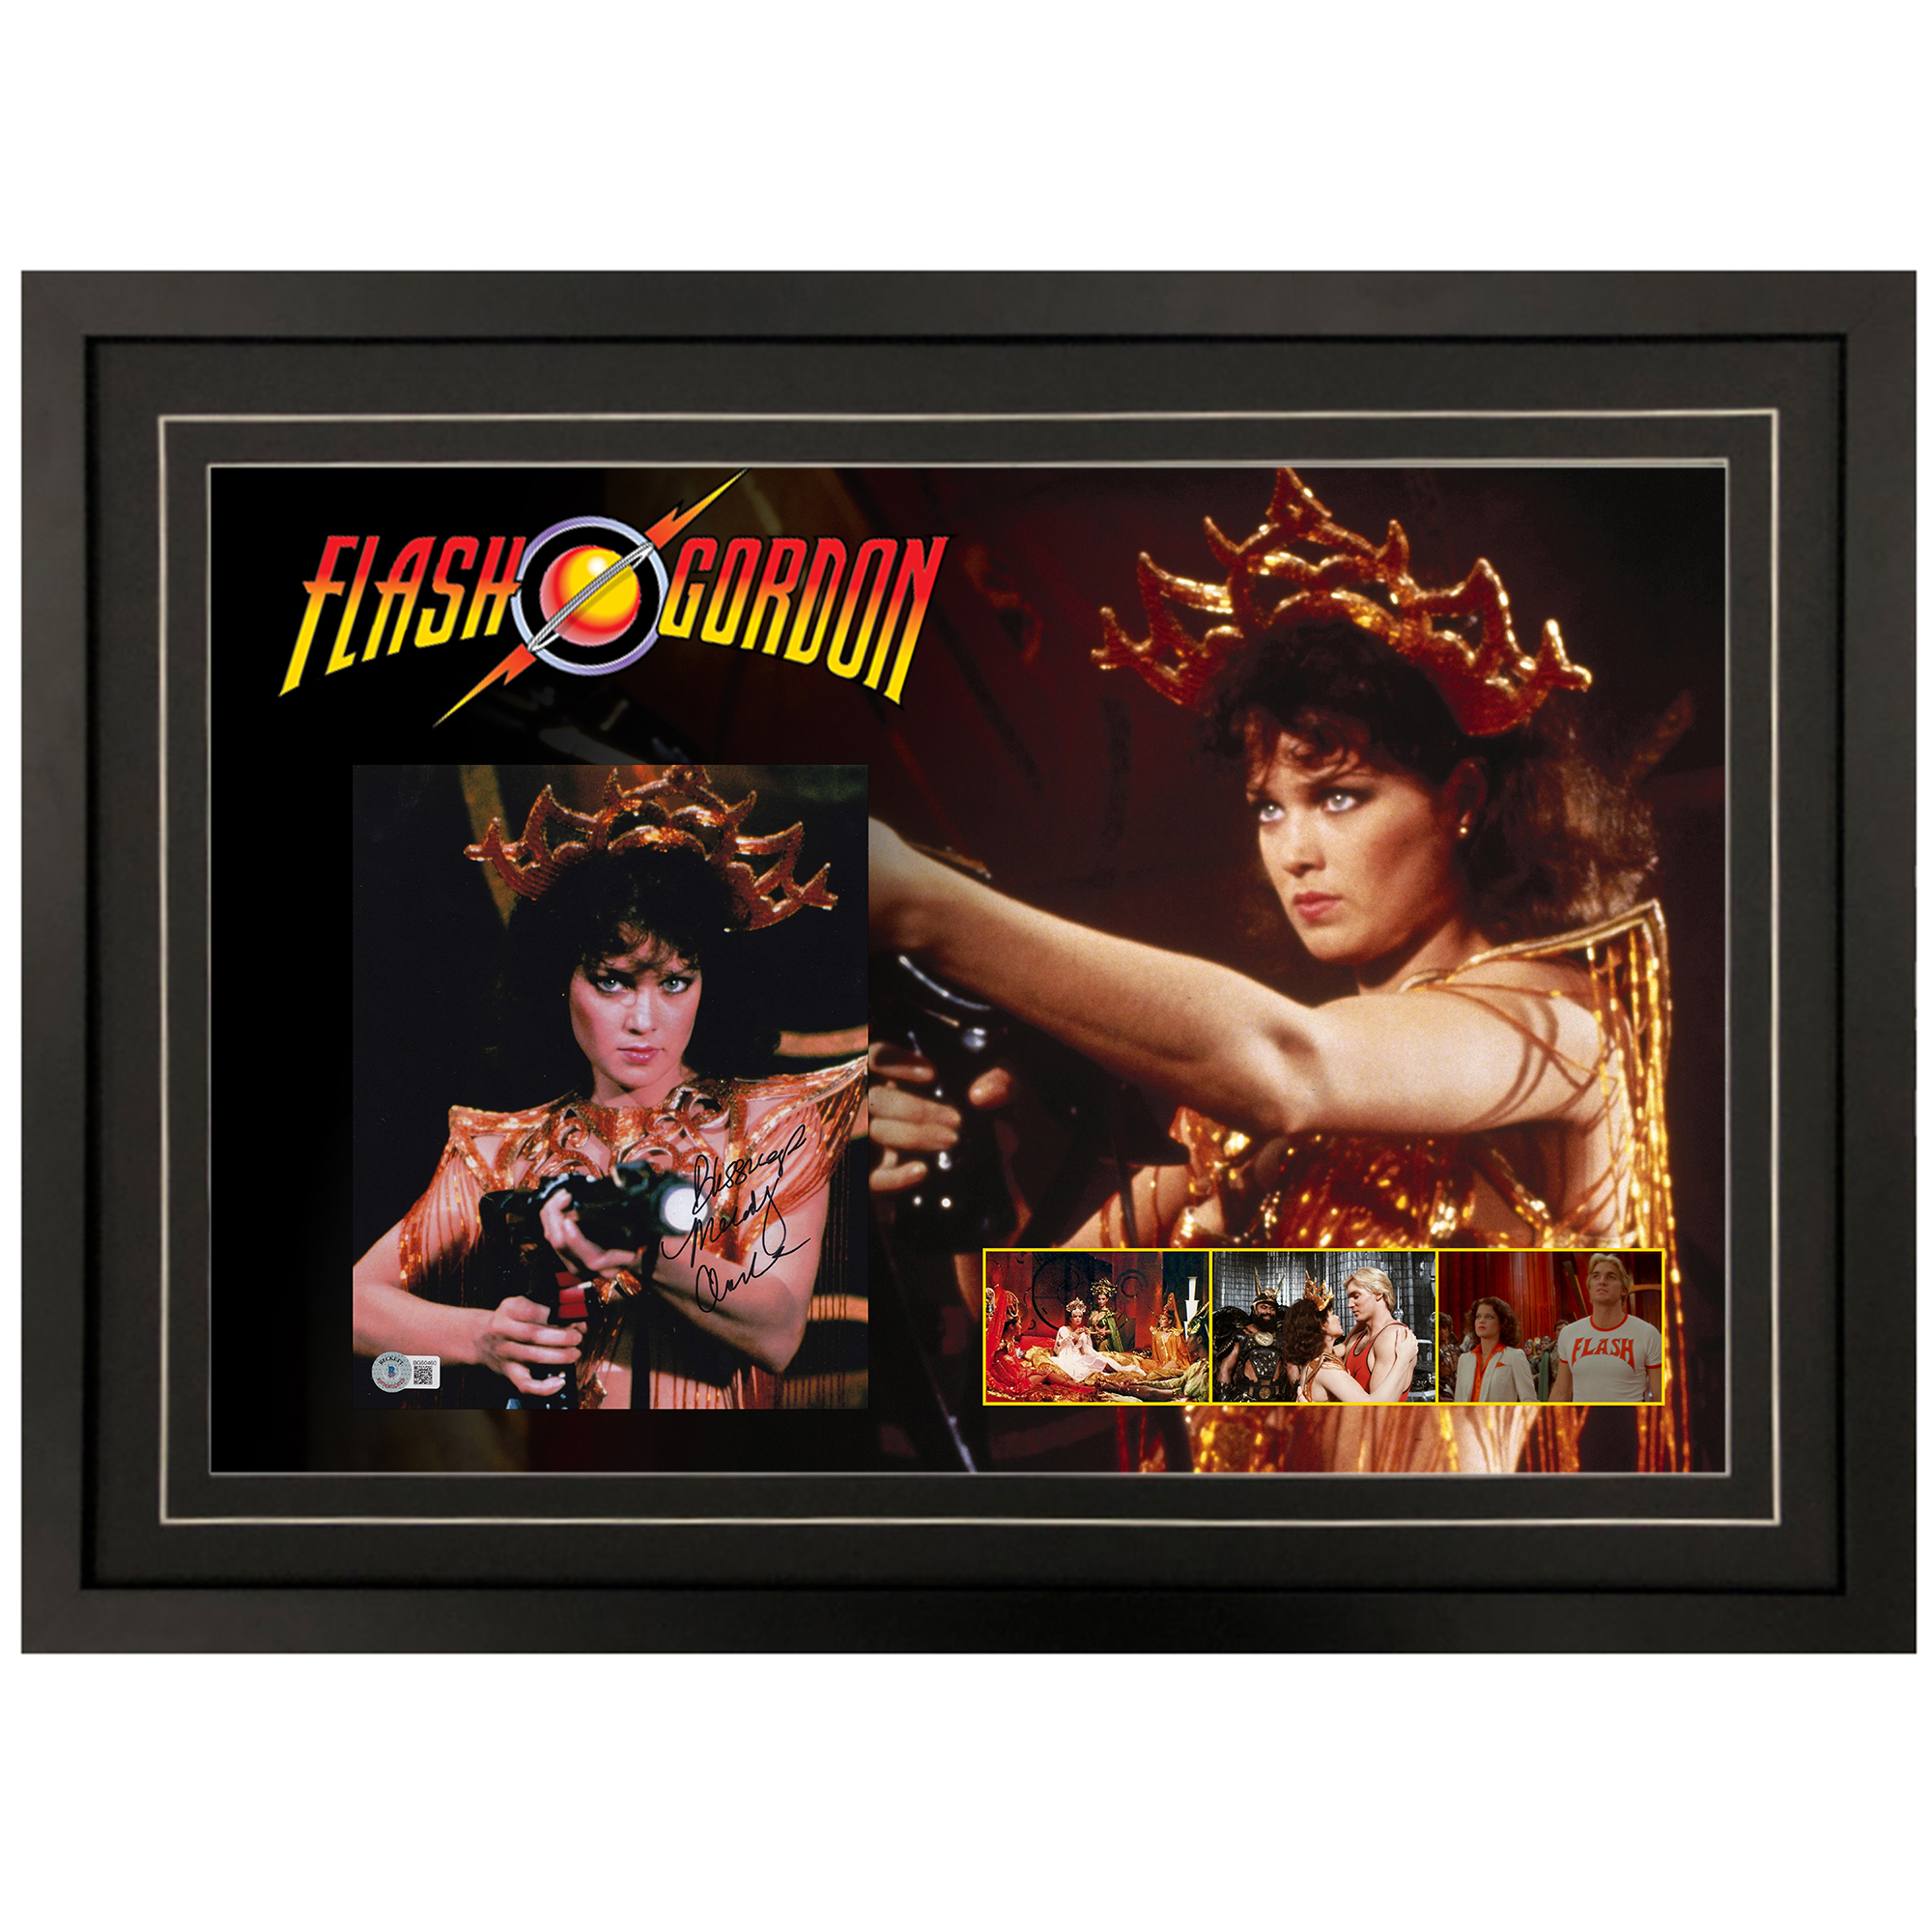 Melody Anderson – “Flash Gordon” Signed & Frame...